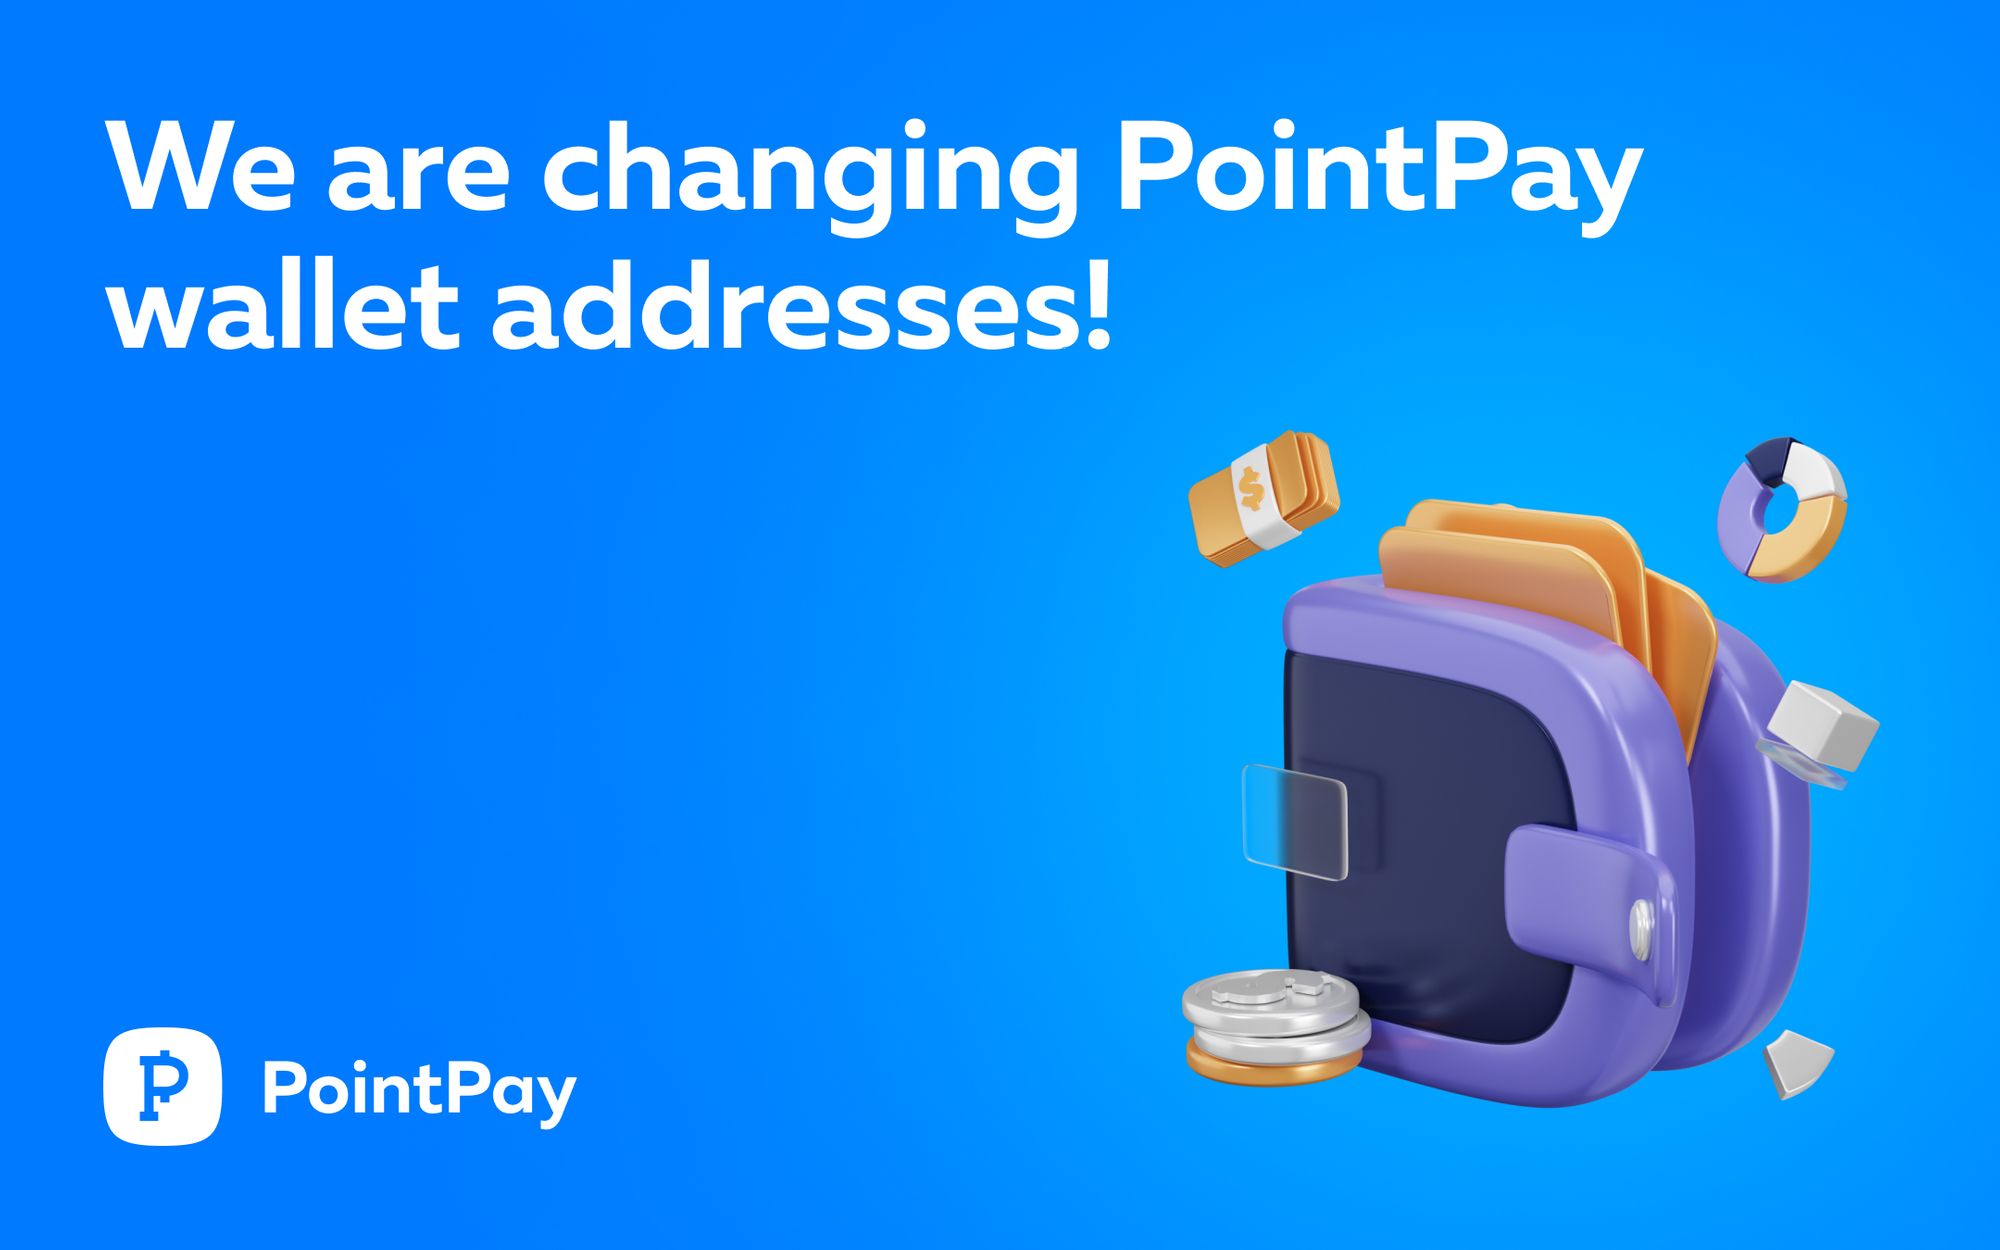 We are changing PointPay wallet addresses!